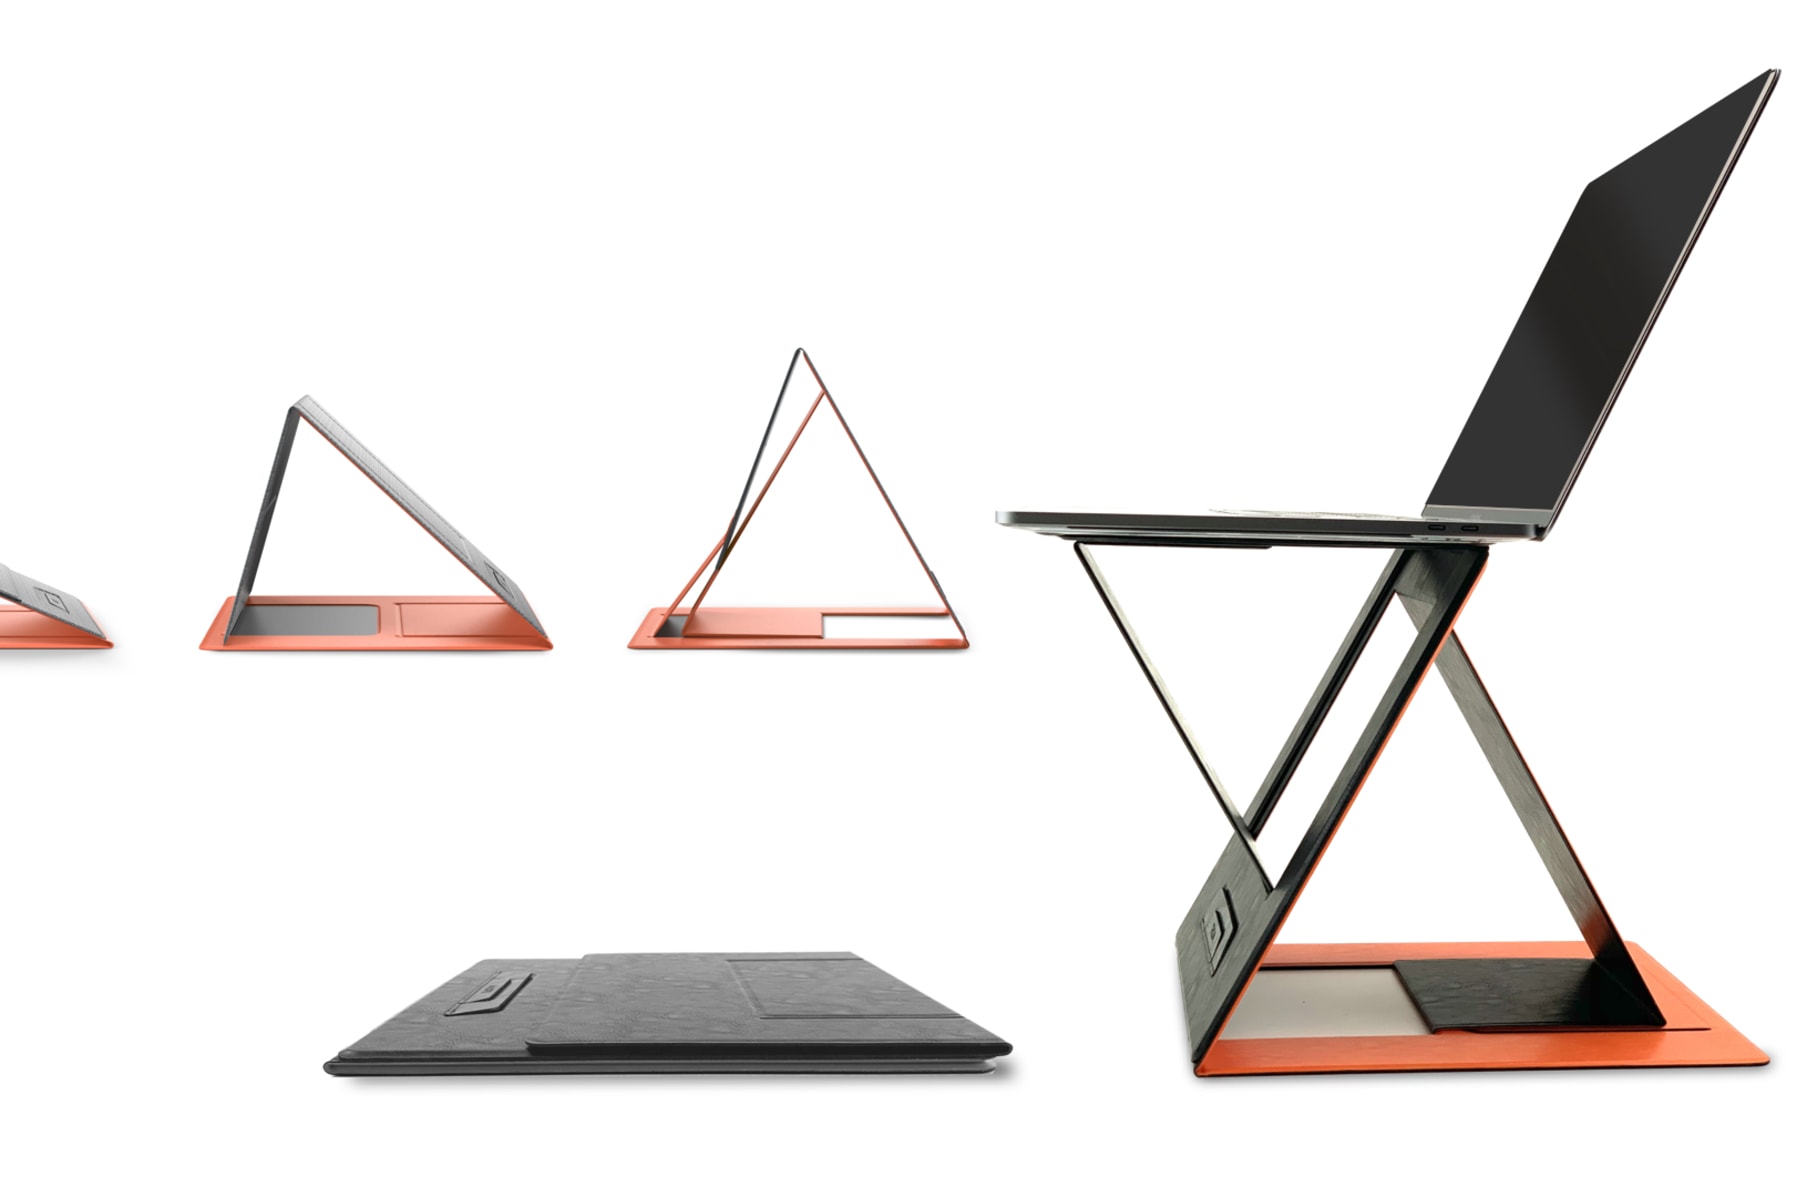 MOFT Z: The 4-in-1 invisible sit-stand laptop desk